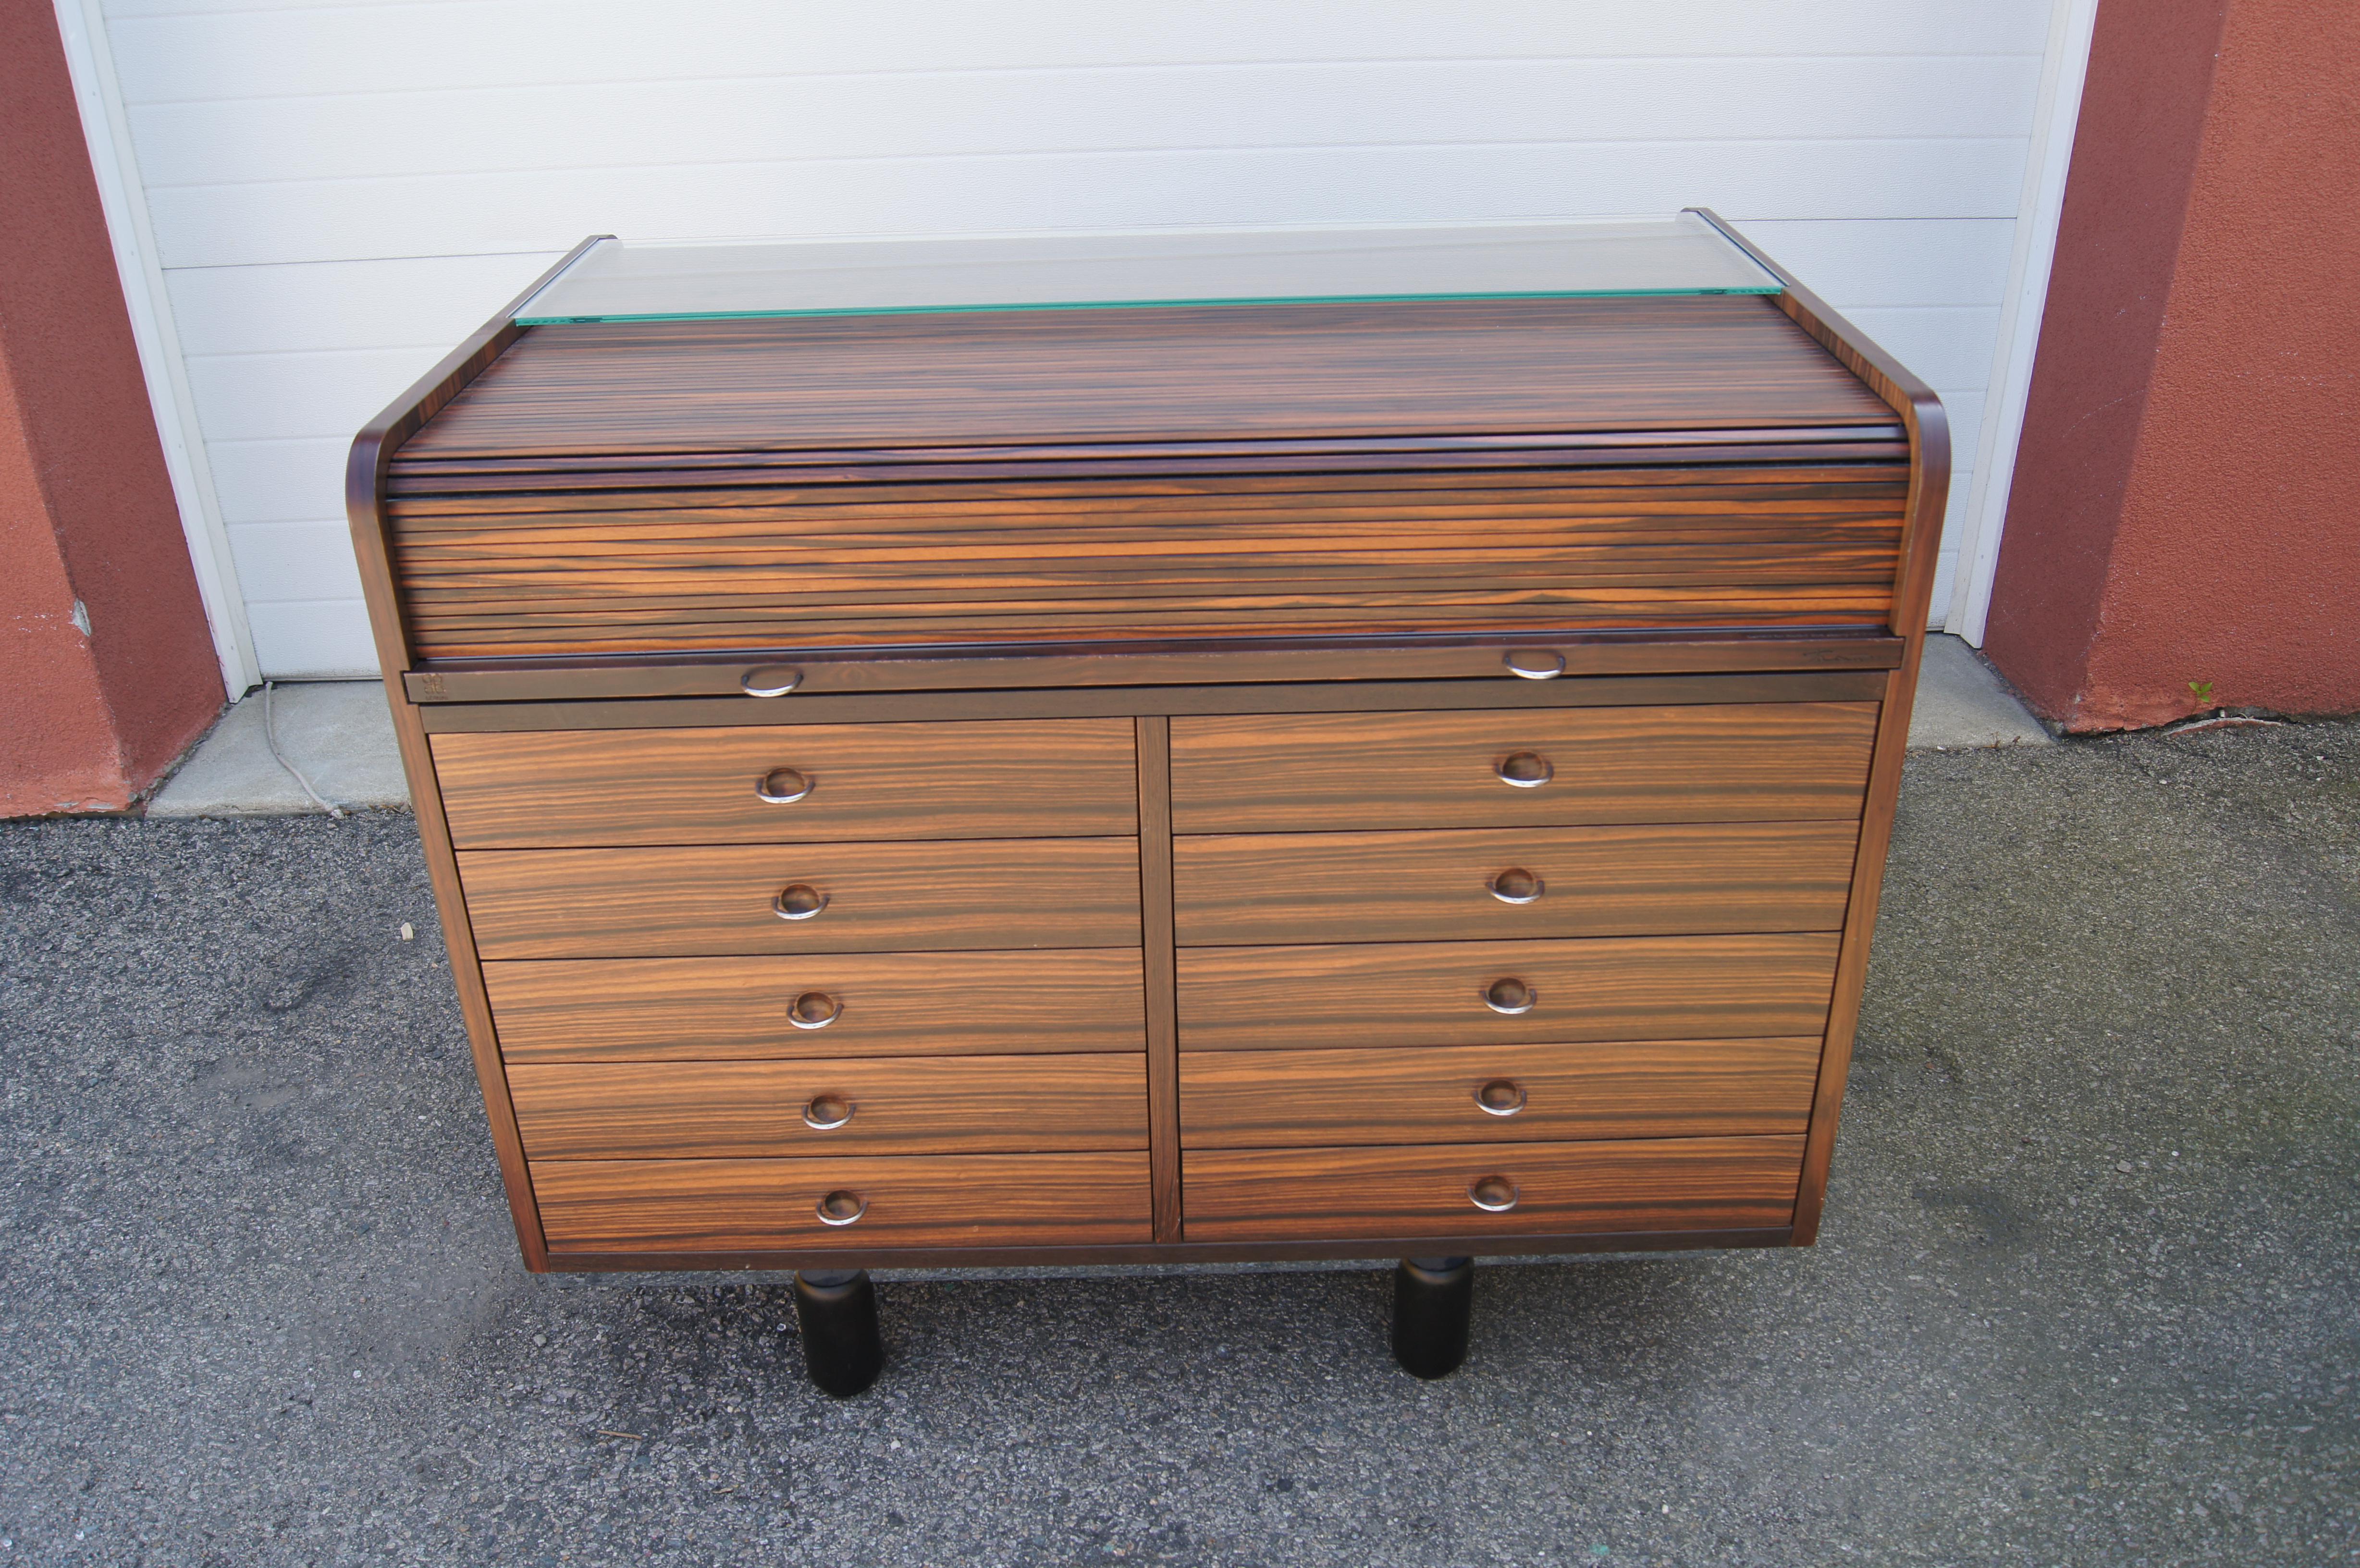 Gianfranco Frattini designed this gorgeous rosewood rolltop desk, model 804, for Bernini in the early 1960s. What appears to be a compact chest of ten drawers with chrome pulls transforms into a desk when the concealed leather-covered top is pulled